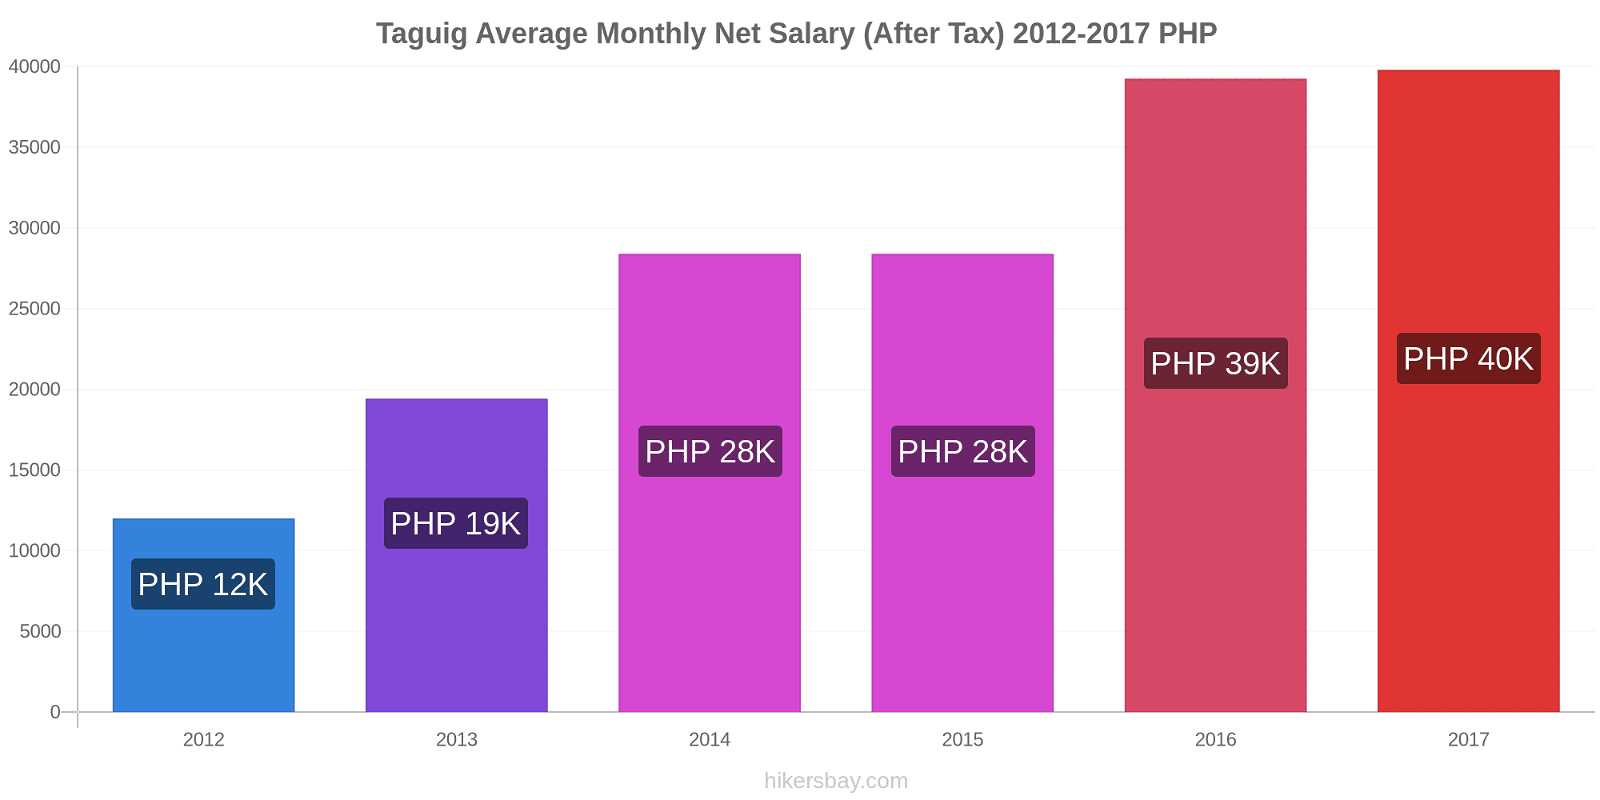 Taguig price changes Average Monthly Net Salary (After Tax) hikersbay.com